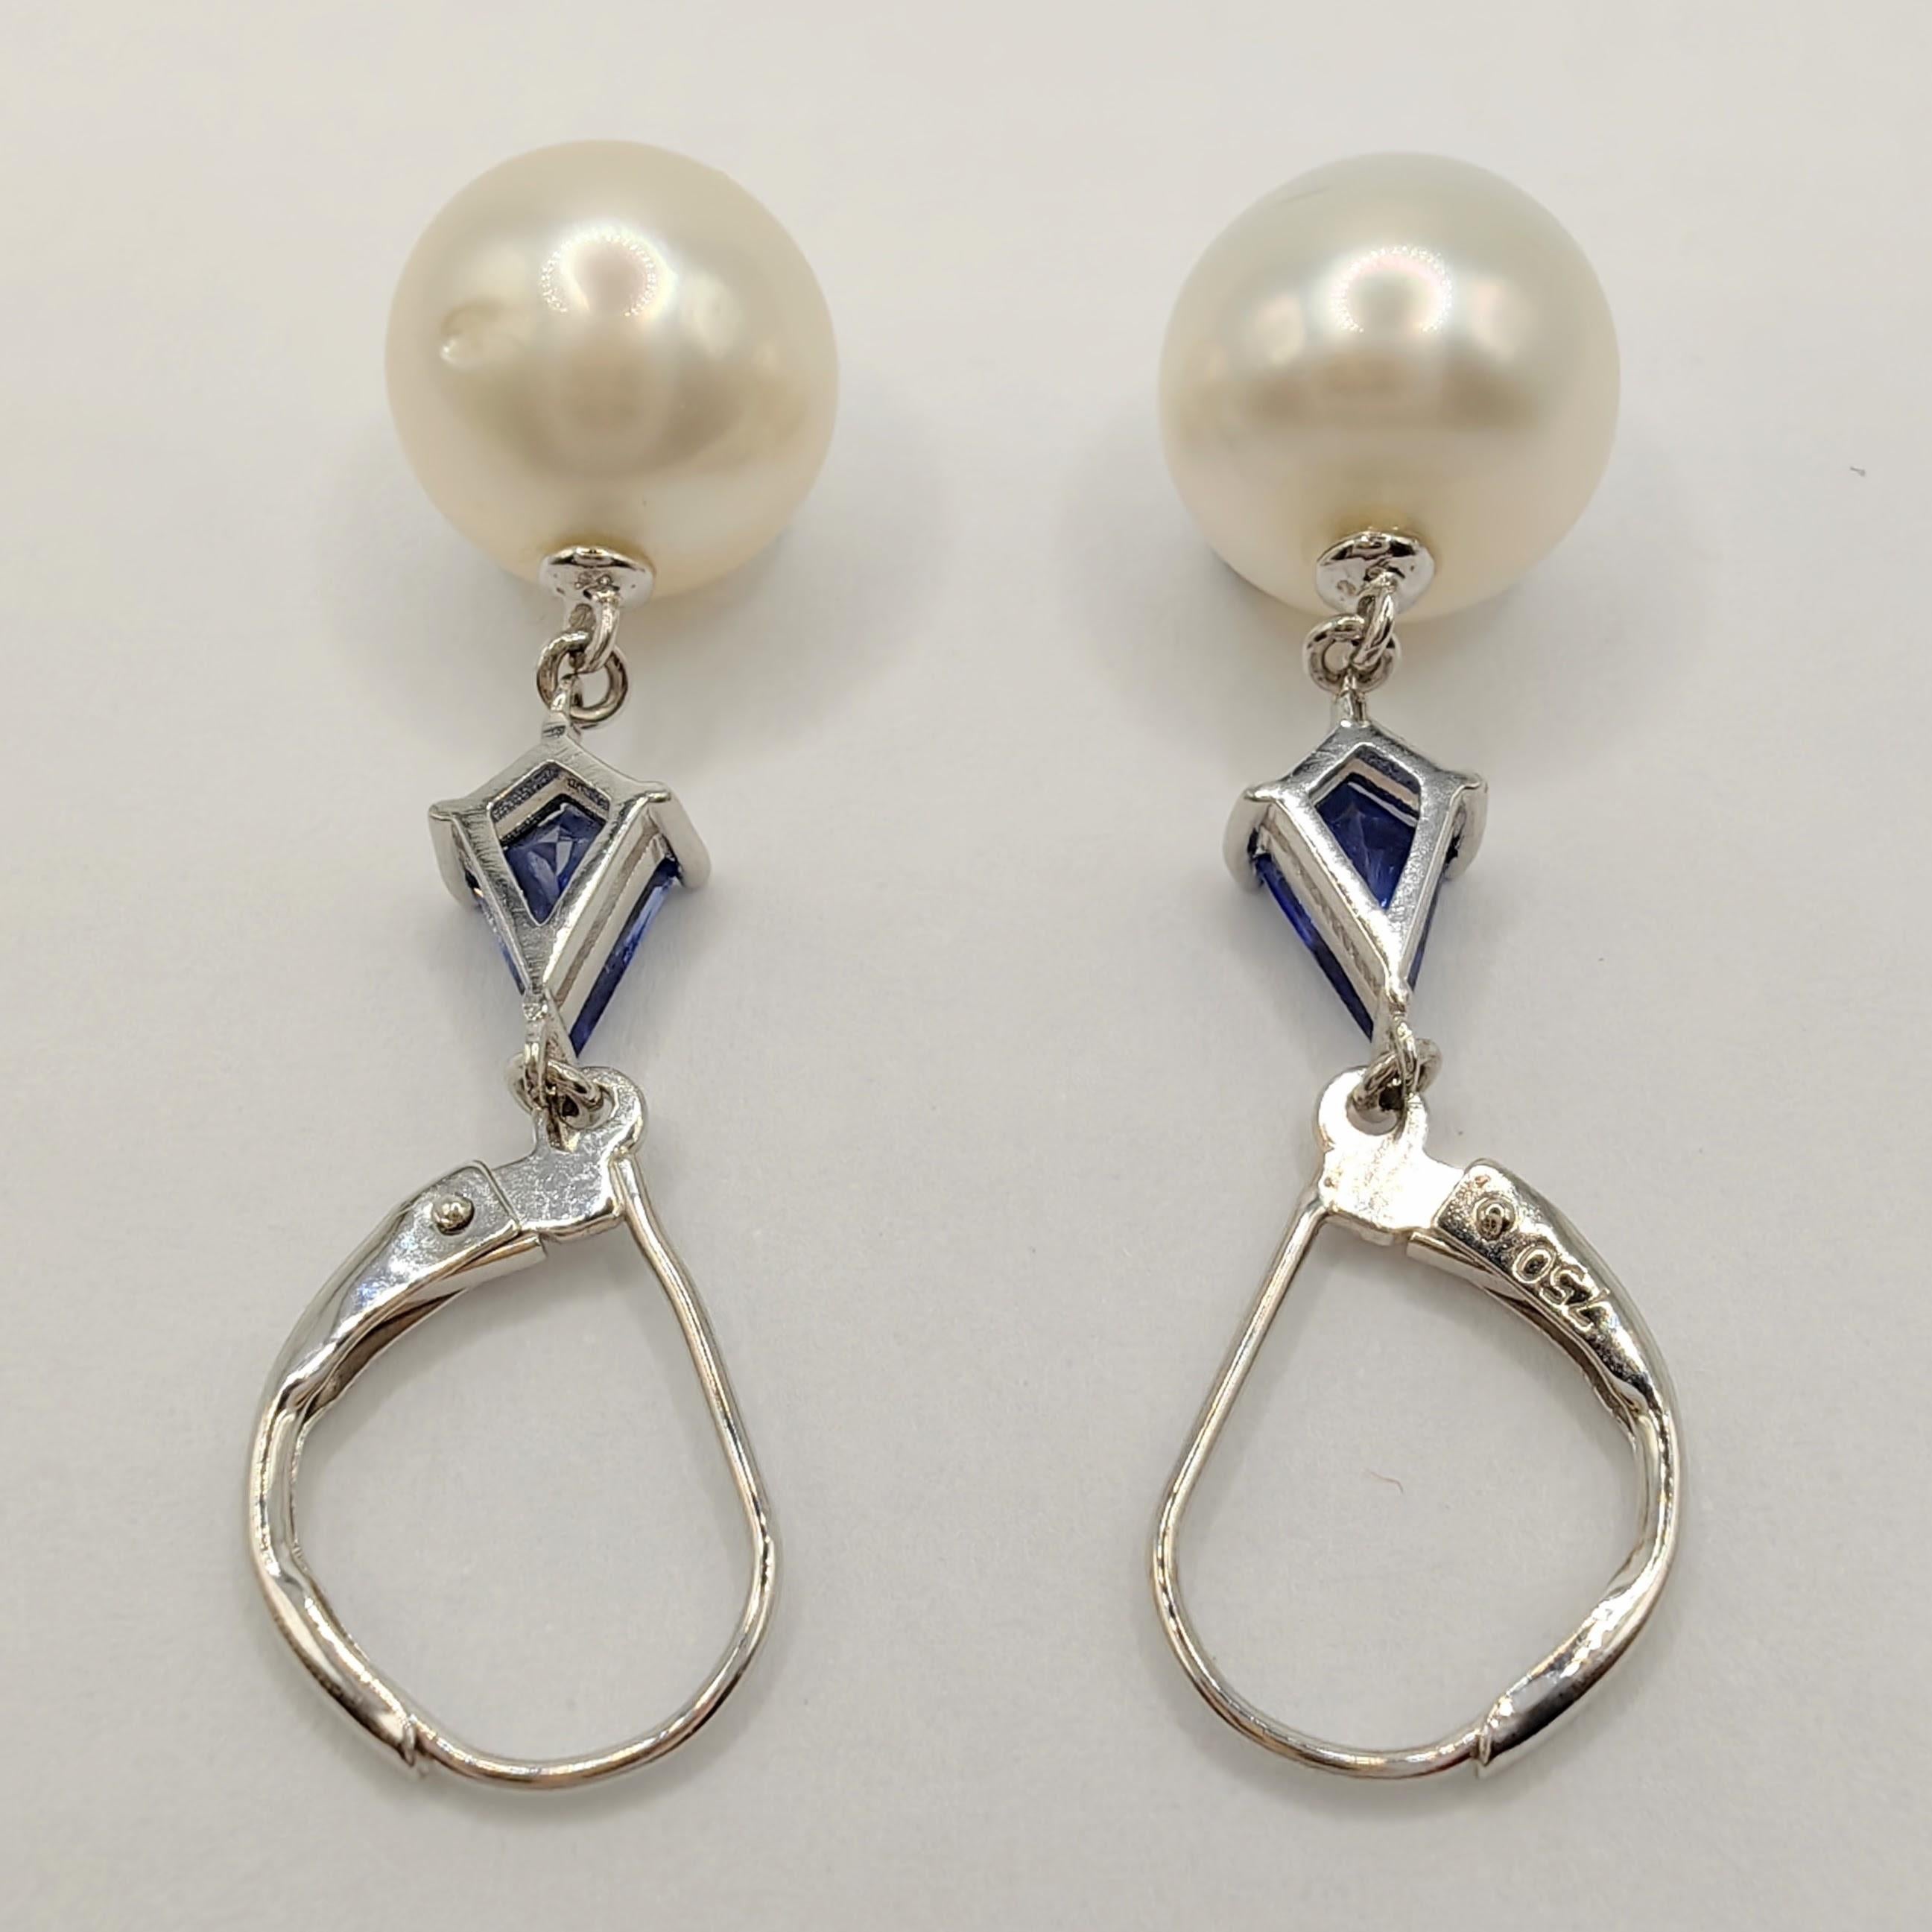 10mm Natural Pearl & Kite Cut Blue Sapphire Dangling Earrings in 18K White Gold For Sale 1